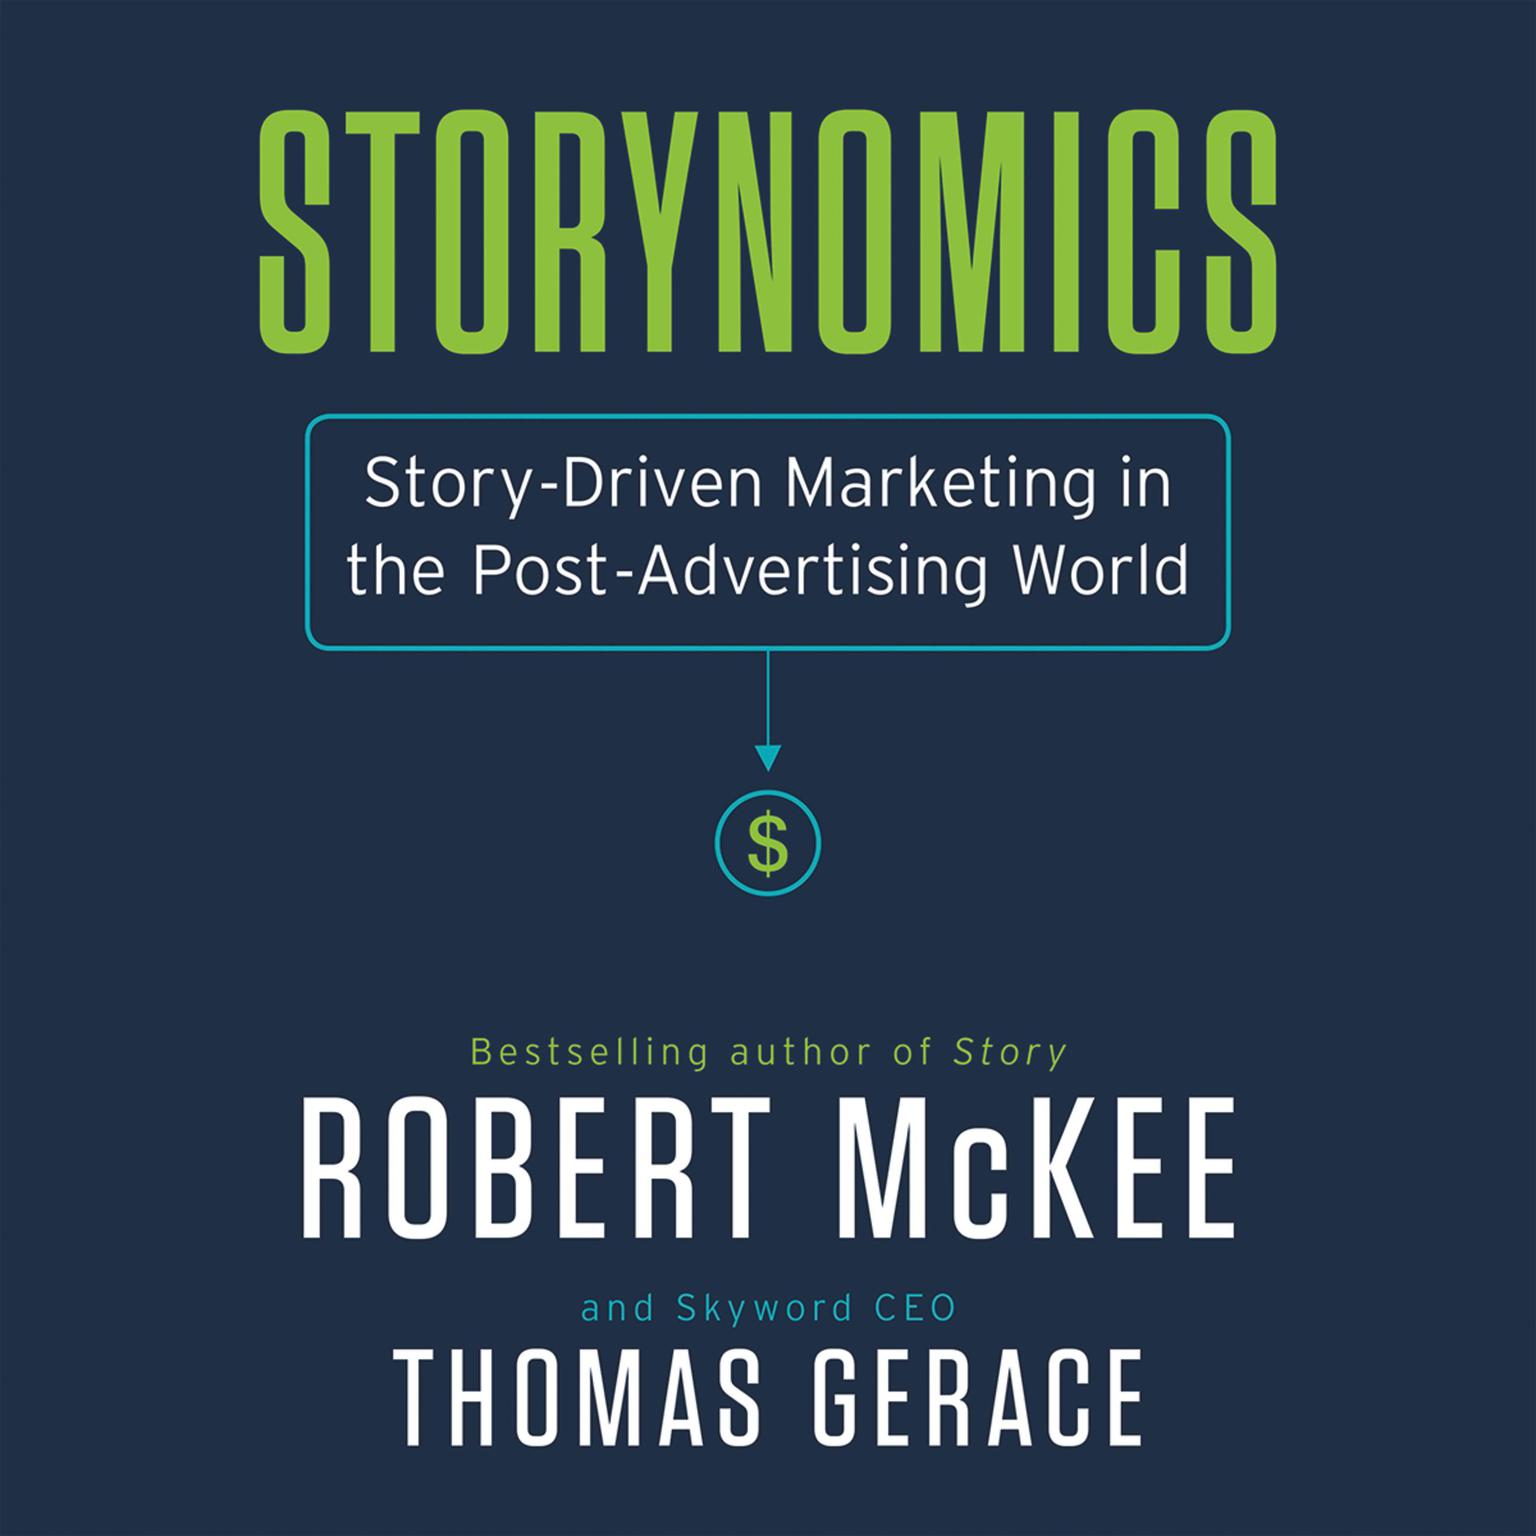 Storynomics: Story-Driven Marketing in the Post-Advertising World Audiobook, by Robert McKee